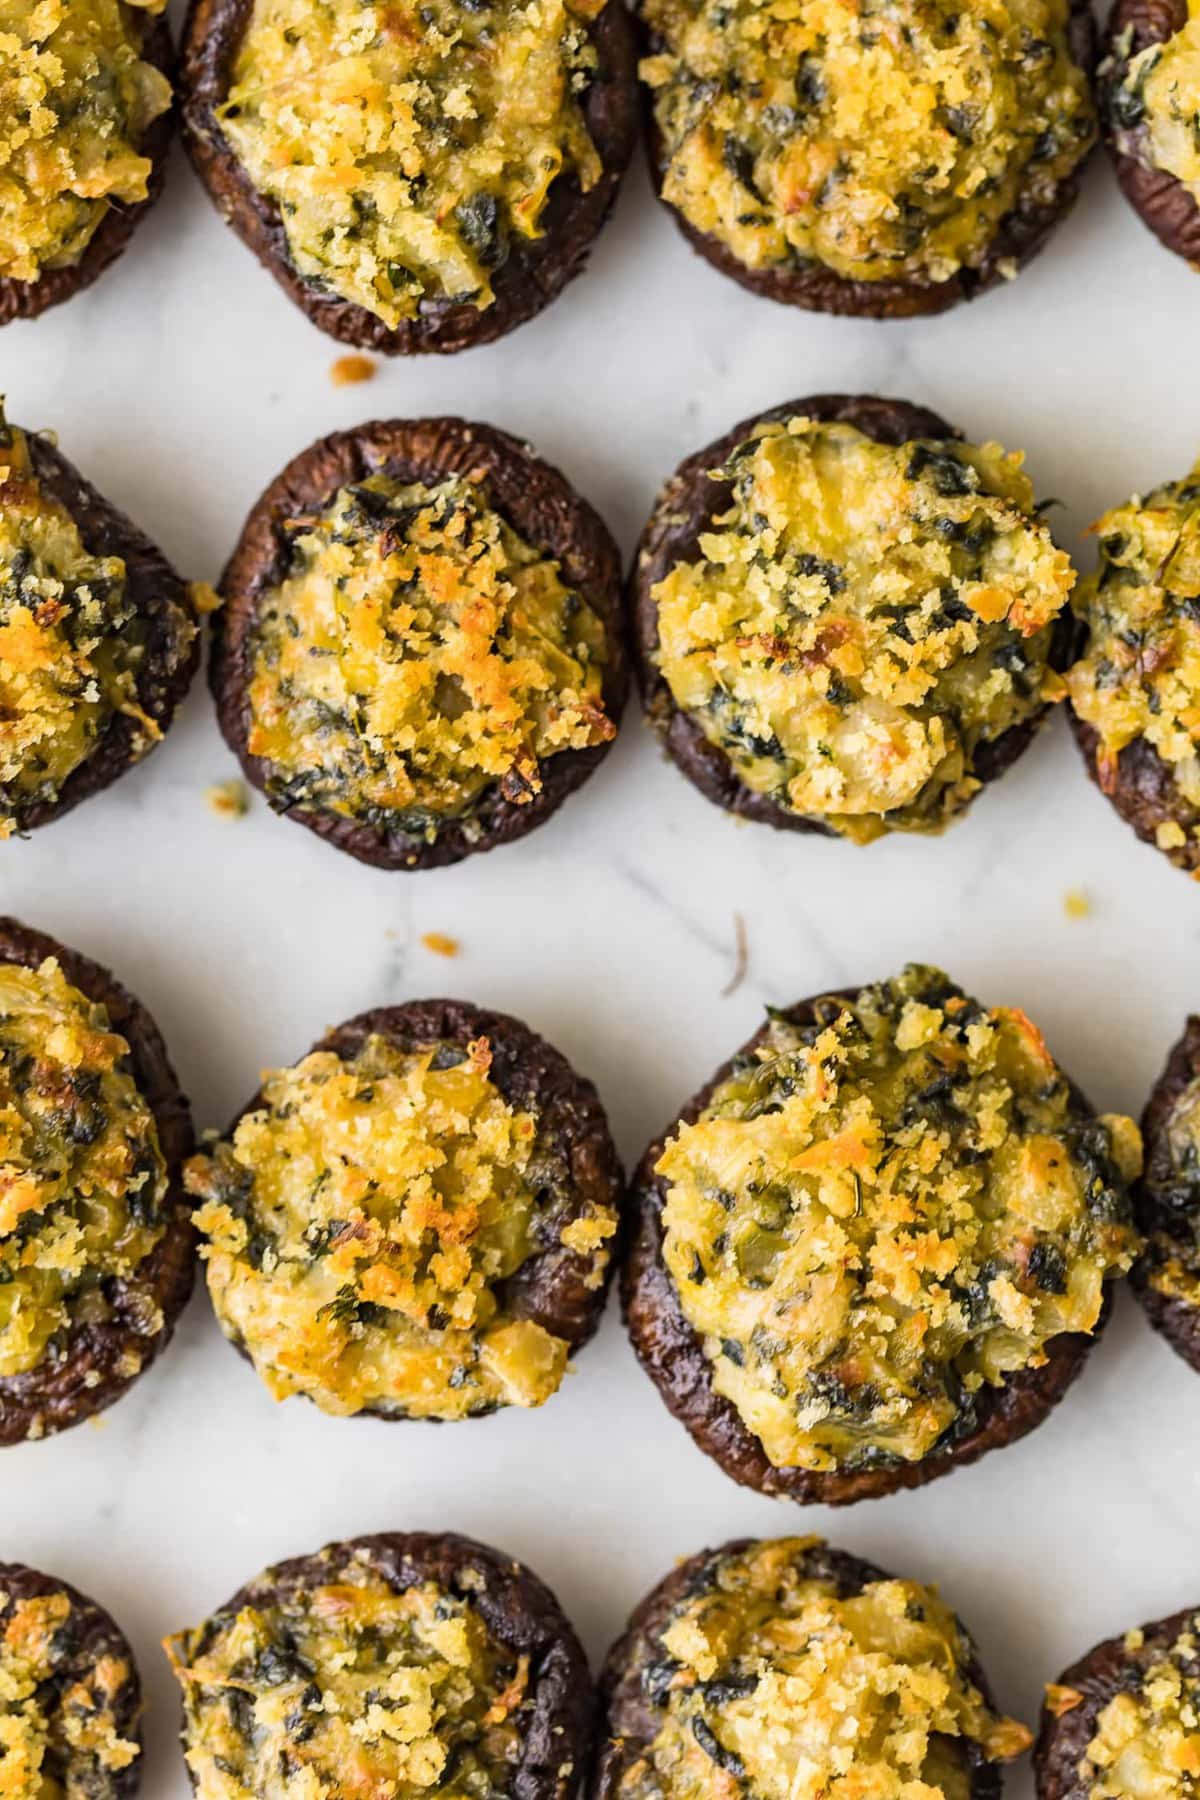 Top shot of Spinach Stuffed Mushrooms on a marble surface